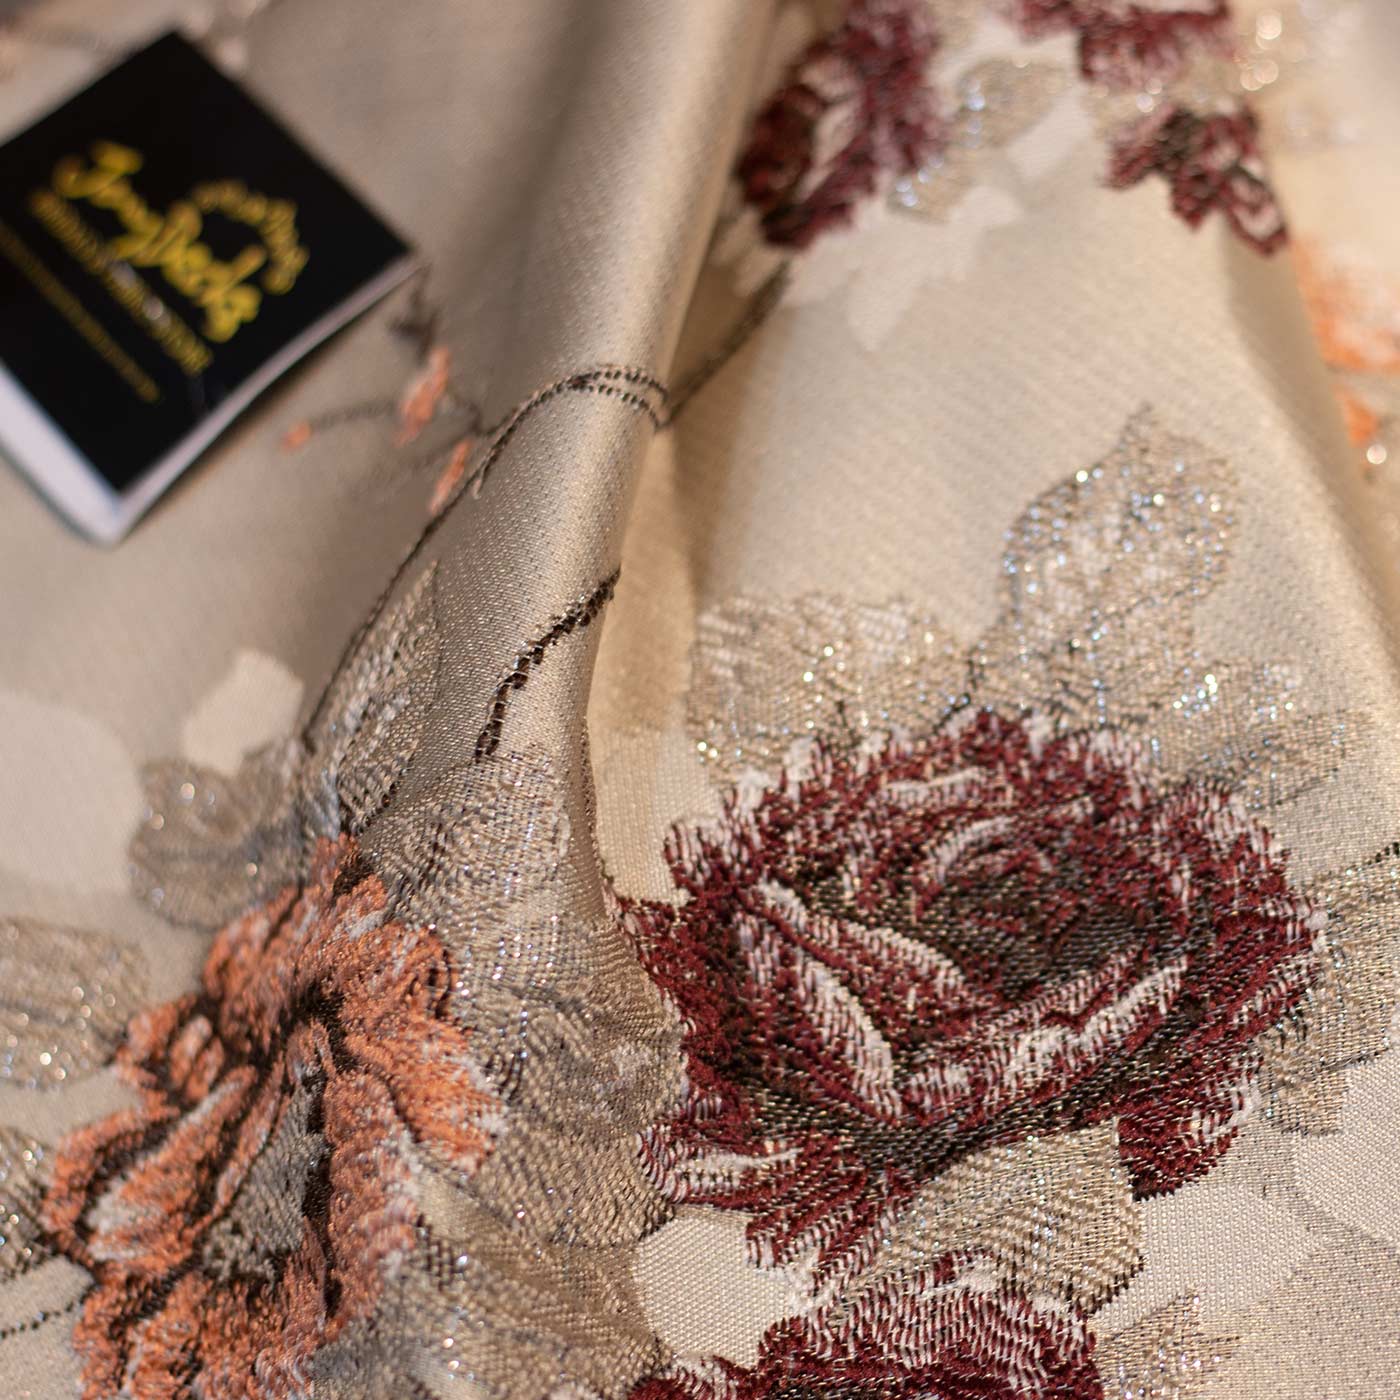 Wine and Peach on Gold Floral Brocade Fabric